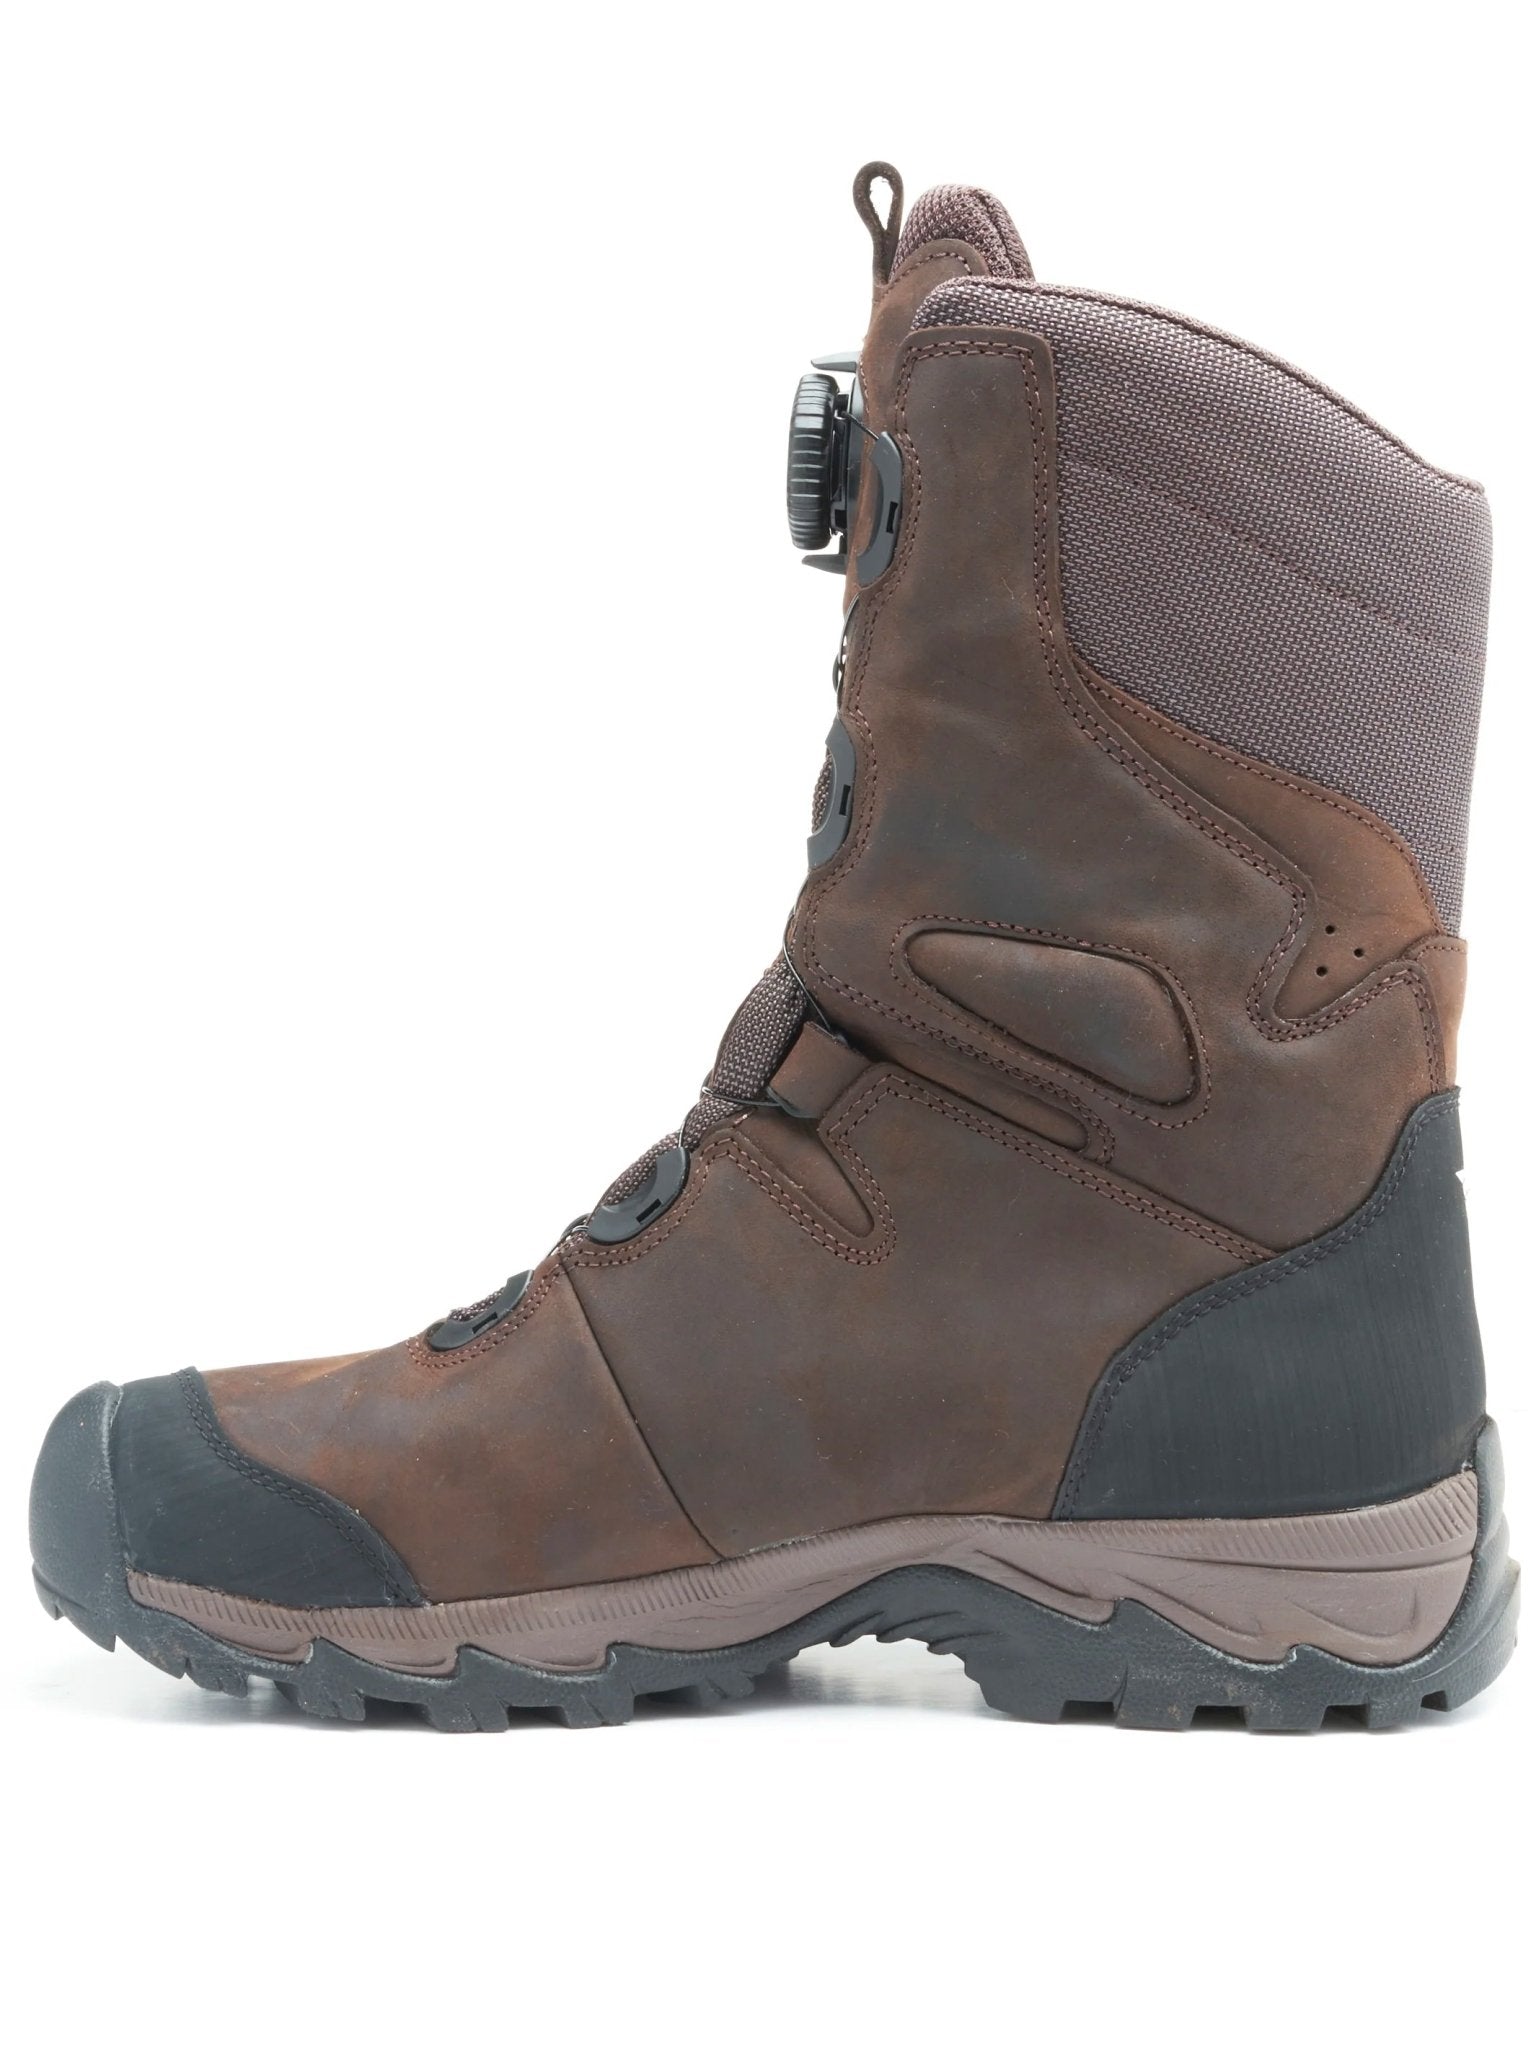 Treksta Treksta - Winchester 10" Gore - Tex Waterproof Boa Lace up system, with Nestfit and Icelock Boots